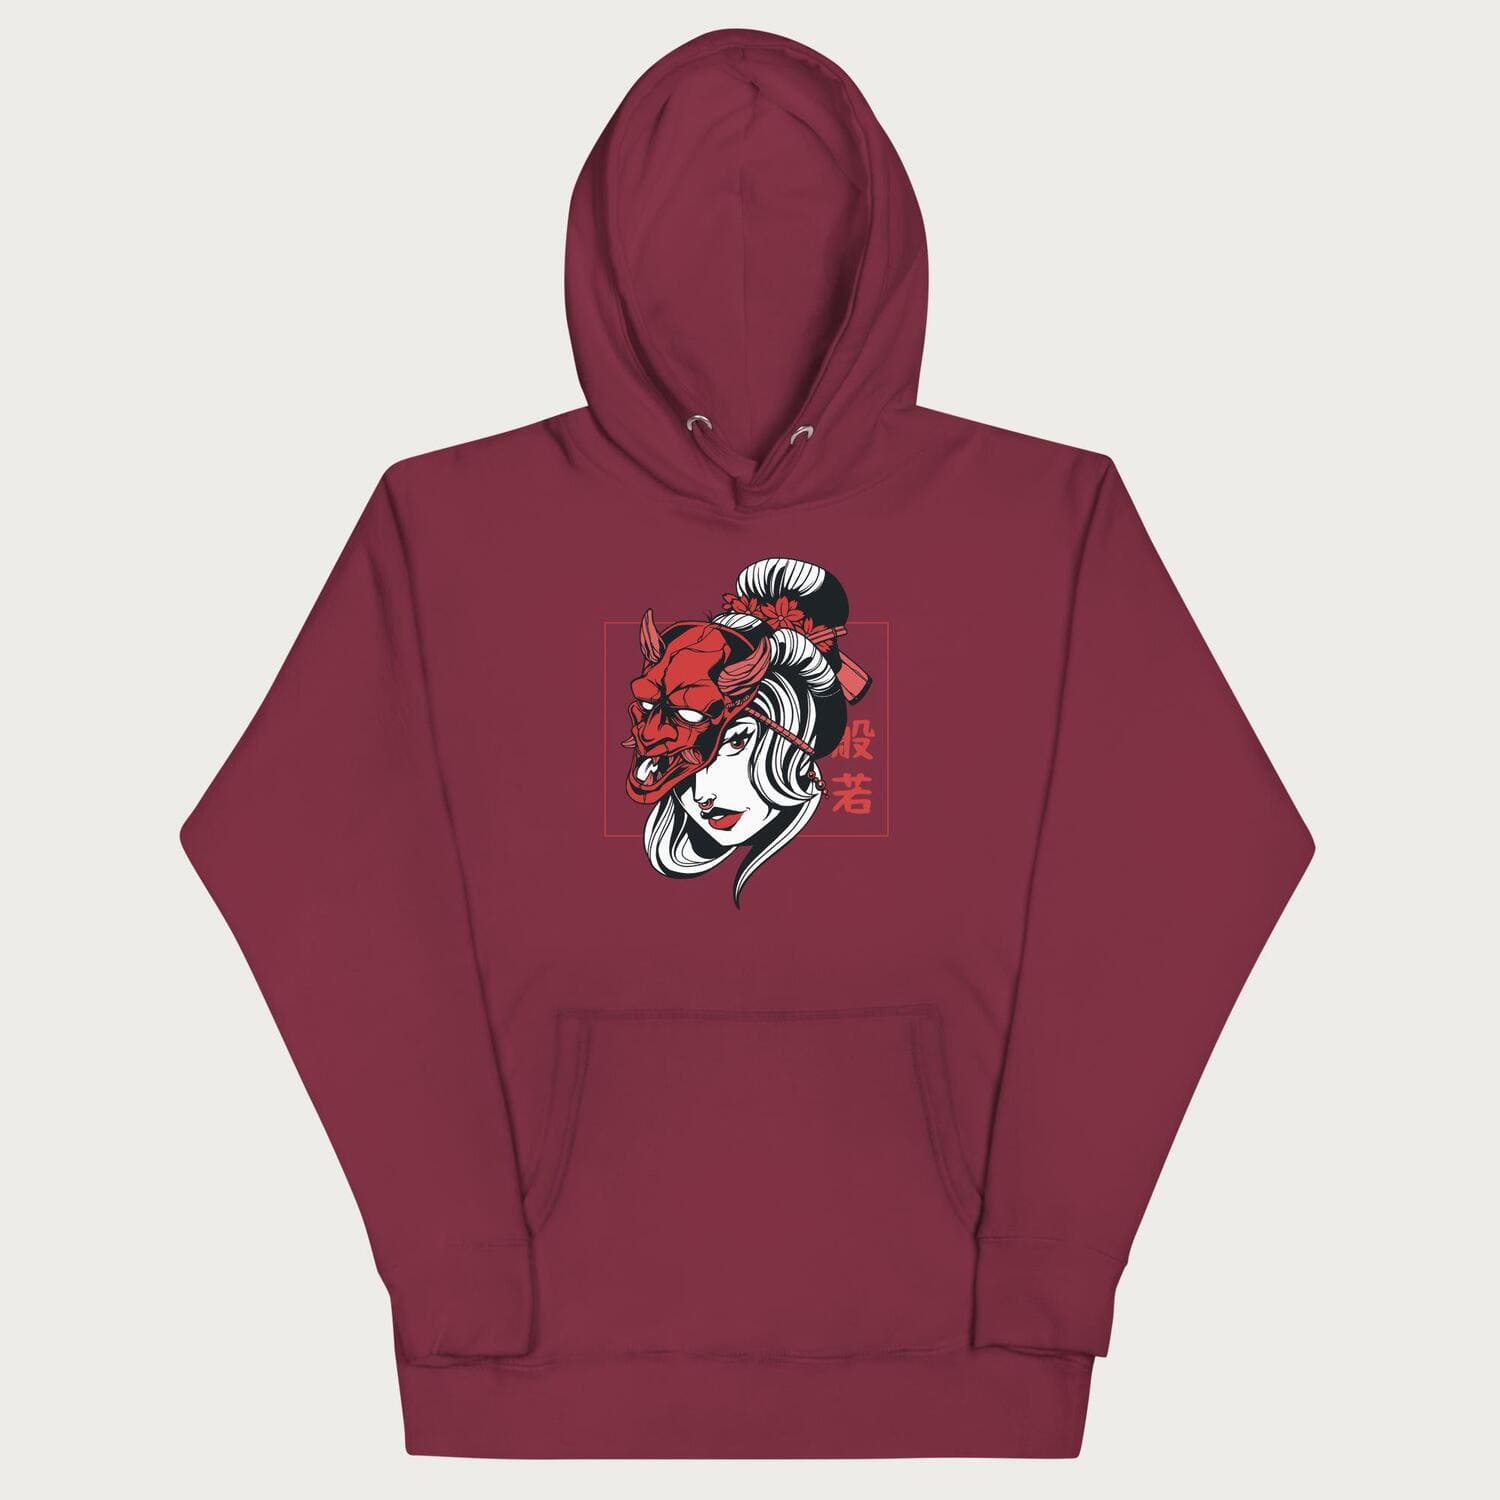 Maroon hoodie with a japanese geisha and hannya mask graphic.